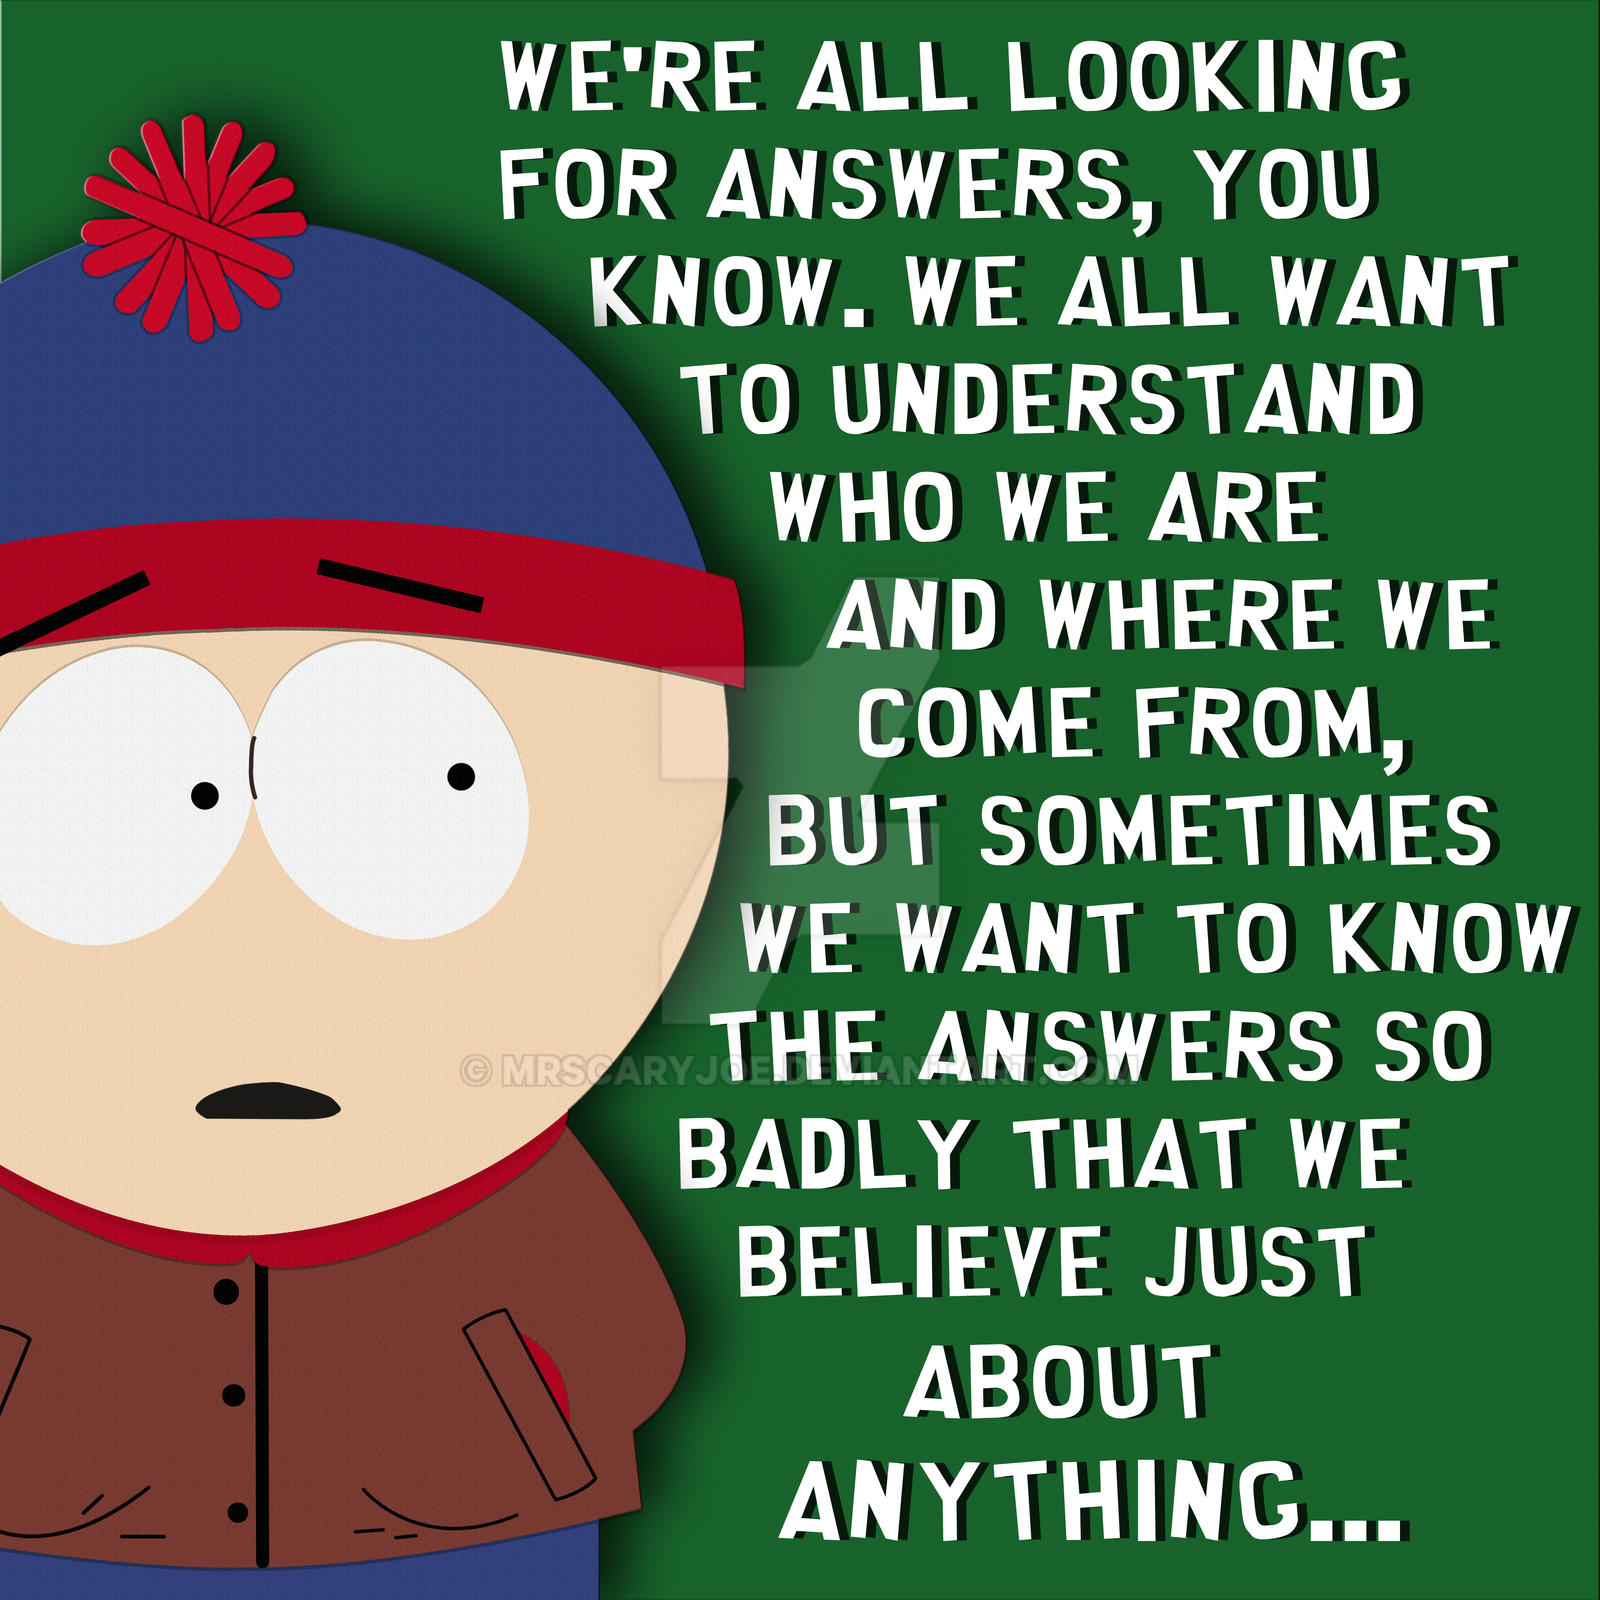 South Park: Stans Quote by MrScaryJoe on DeviantArt